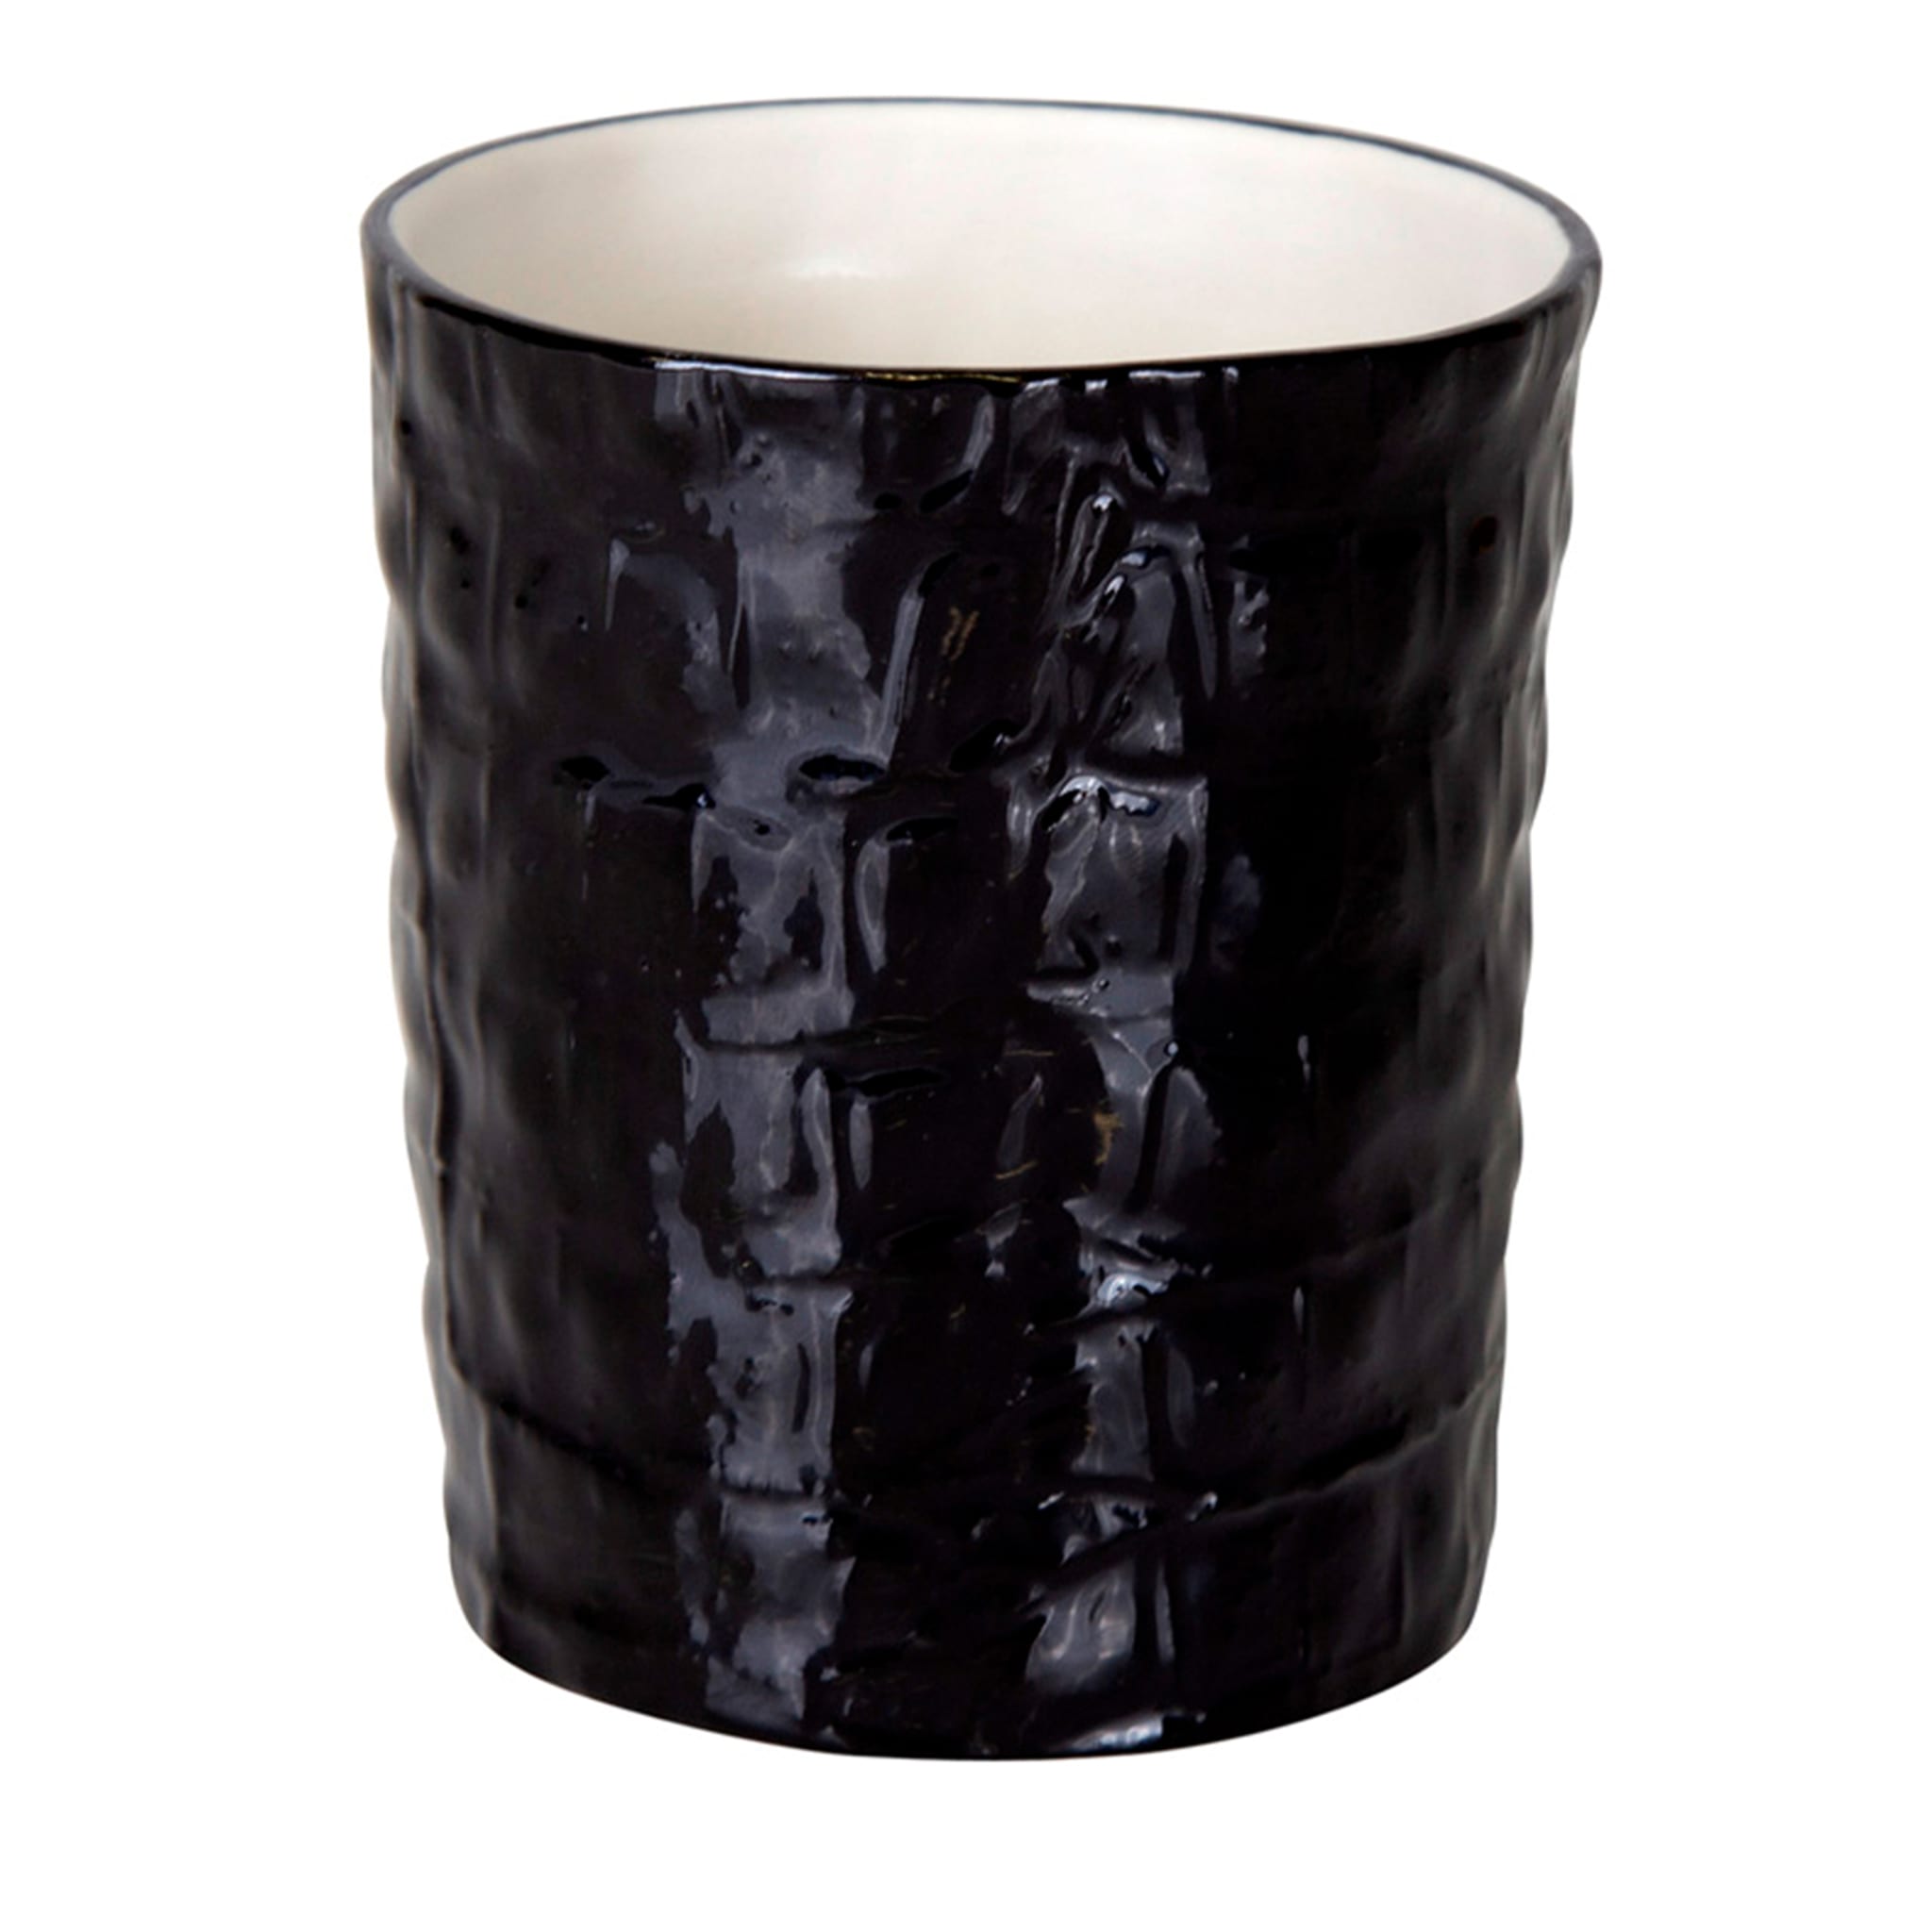  COCCO TOOTHBRUSH HOLDER - BLACK - Main view